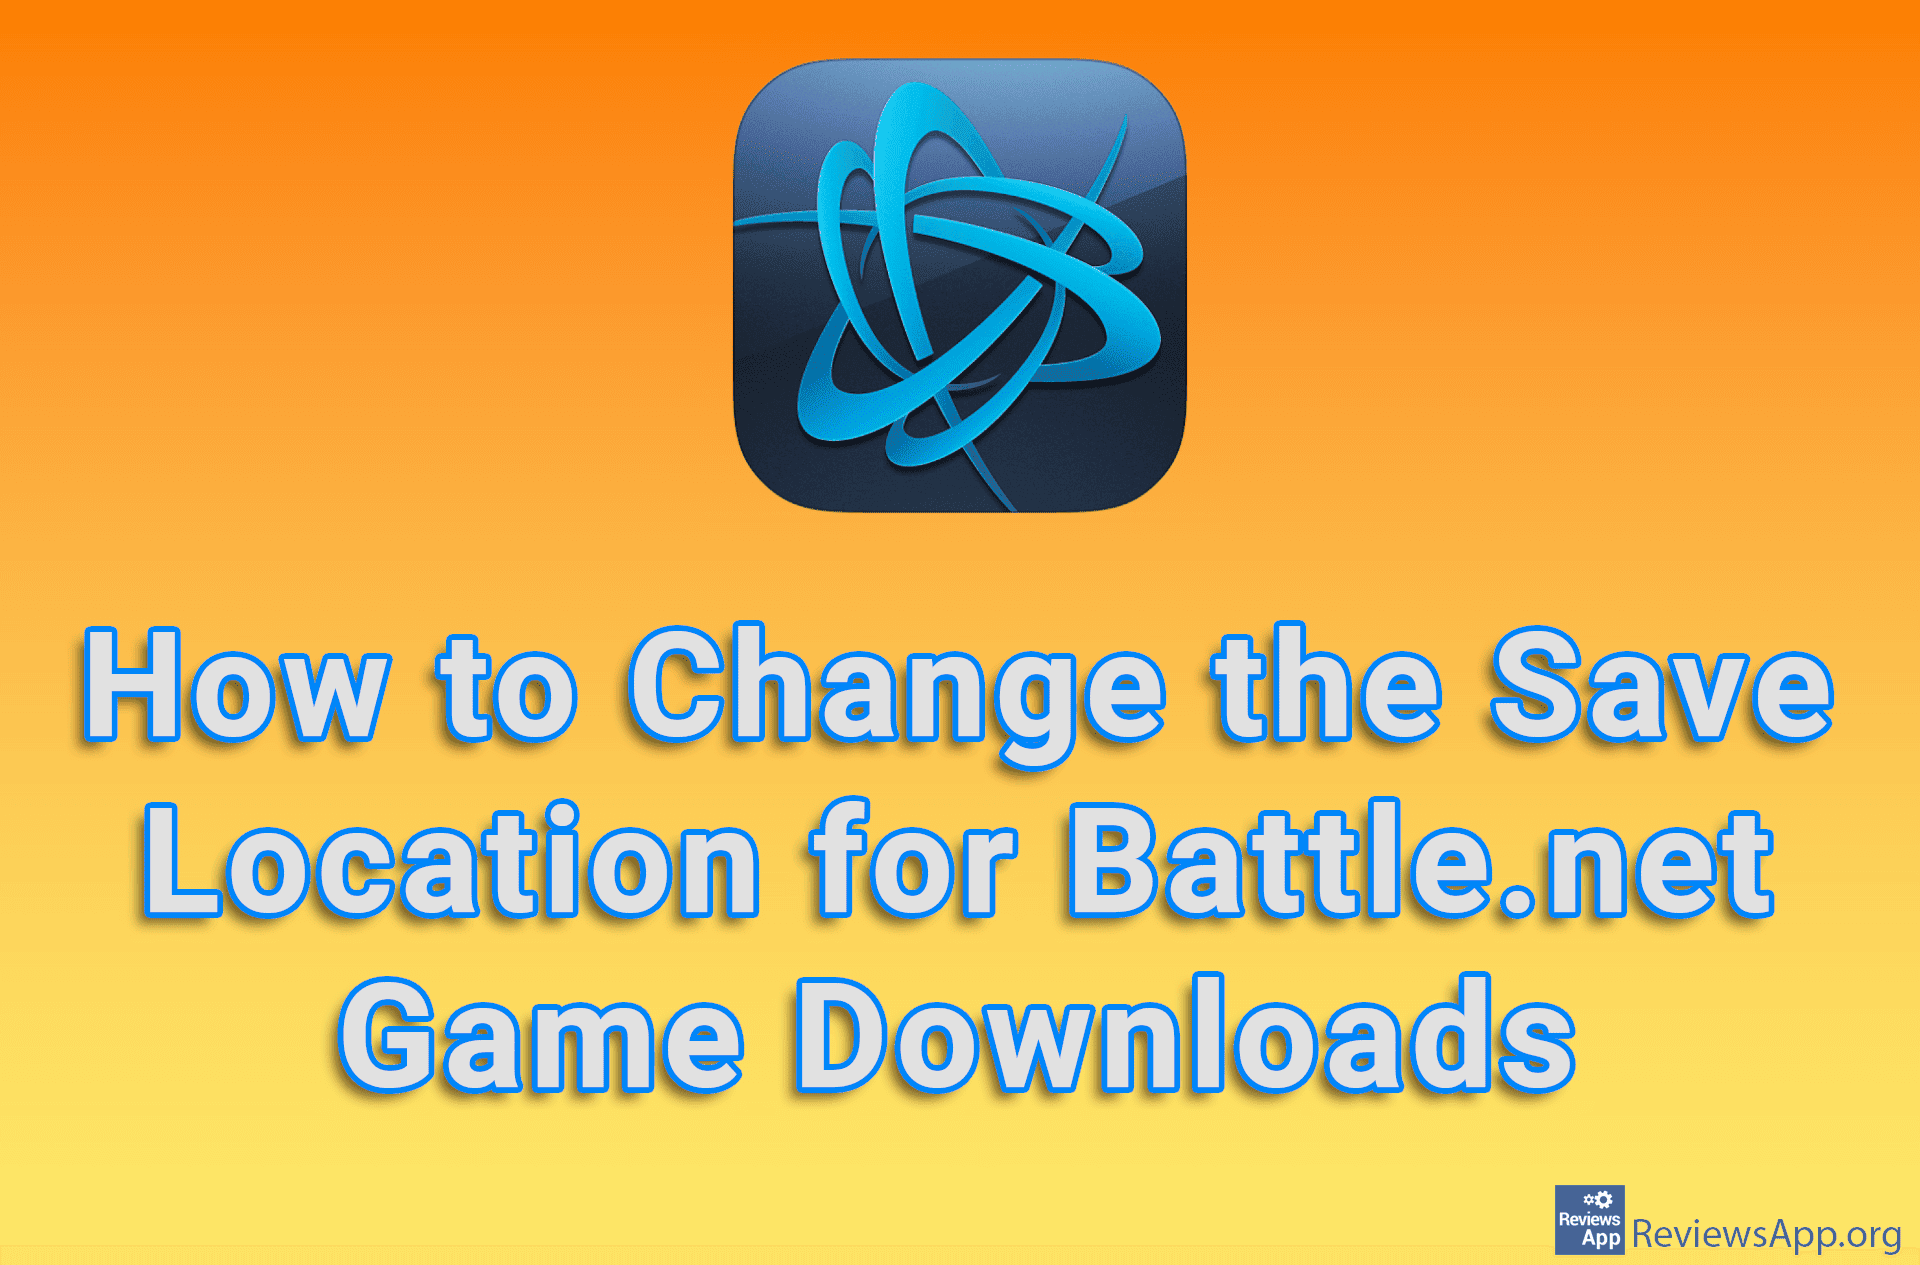 How to Change the Save Location for Battle.net Game Downloads